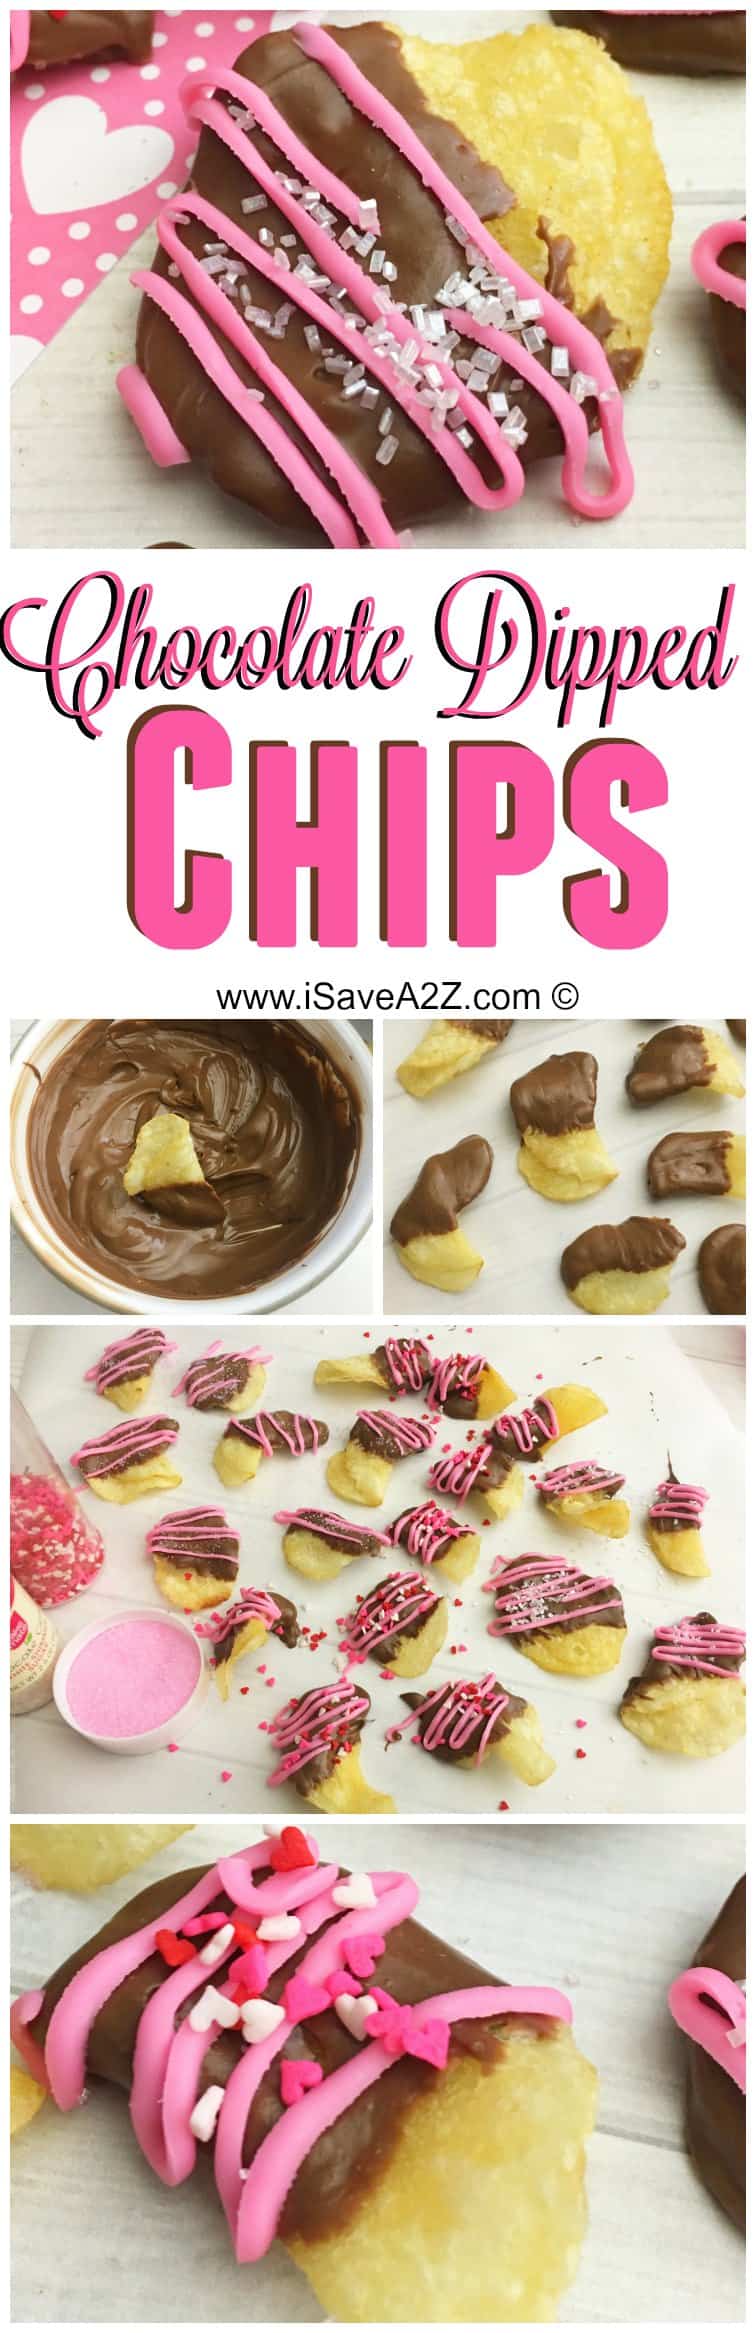 Chocolate Dipped Potato Chips Instructions